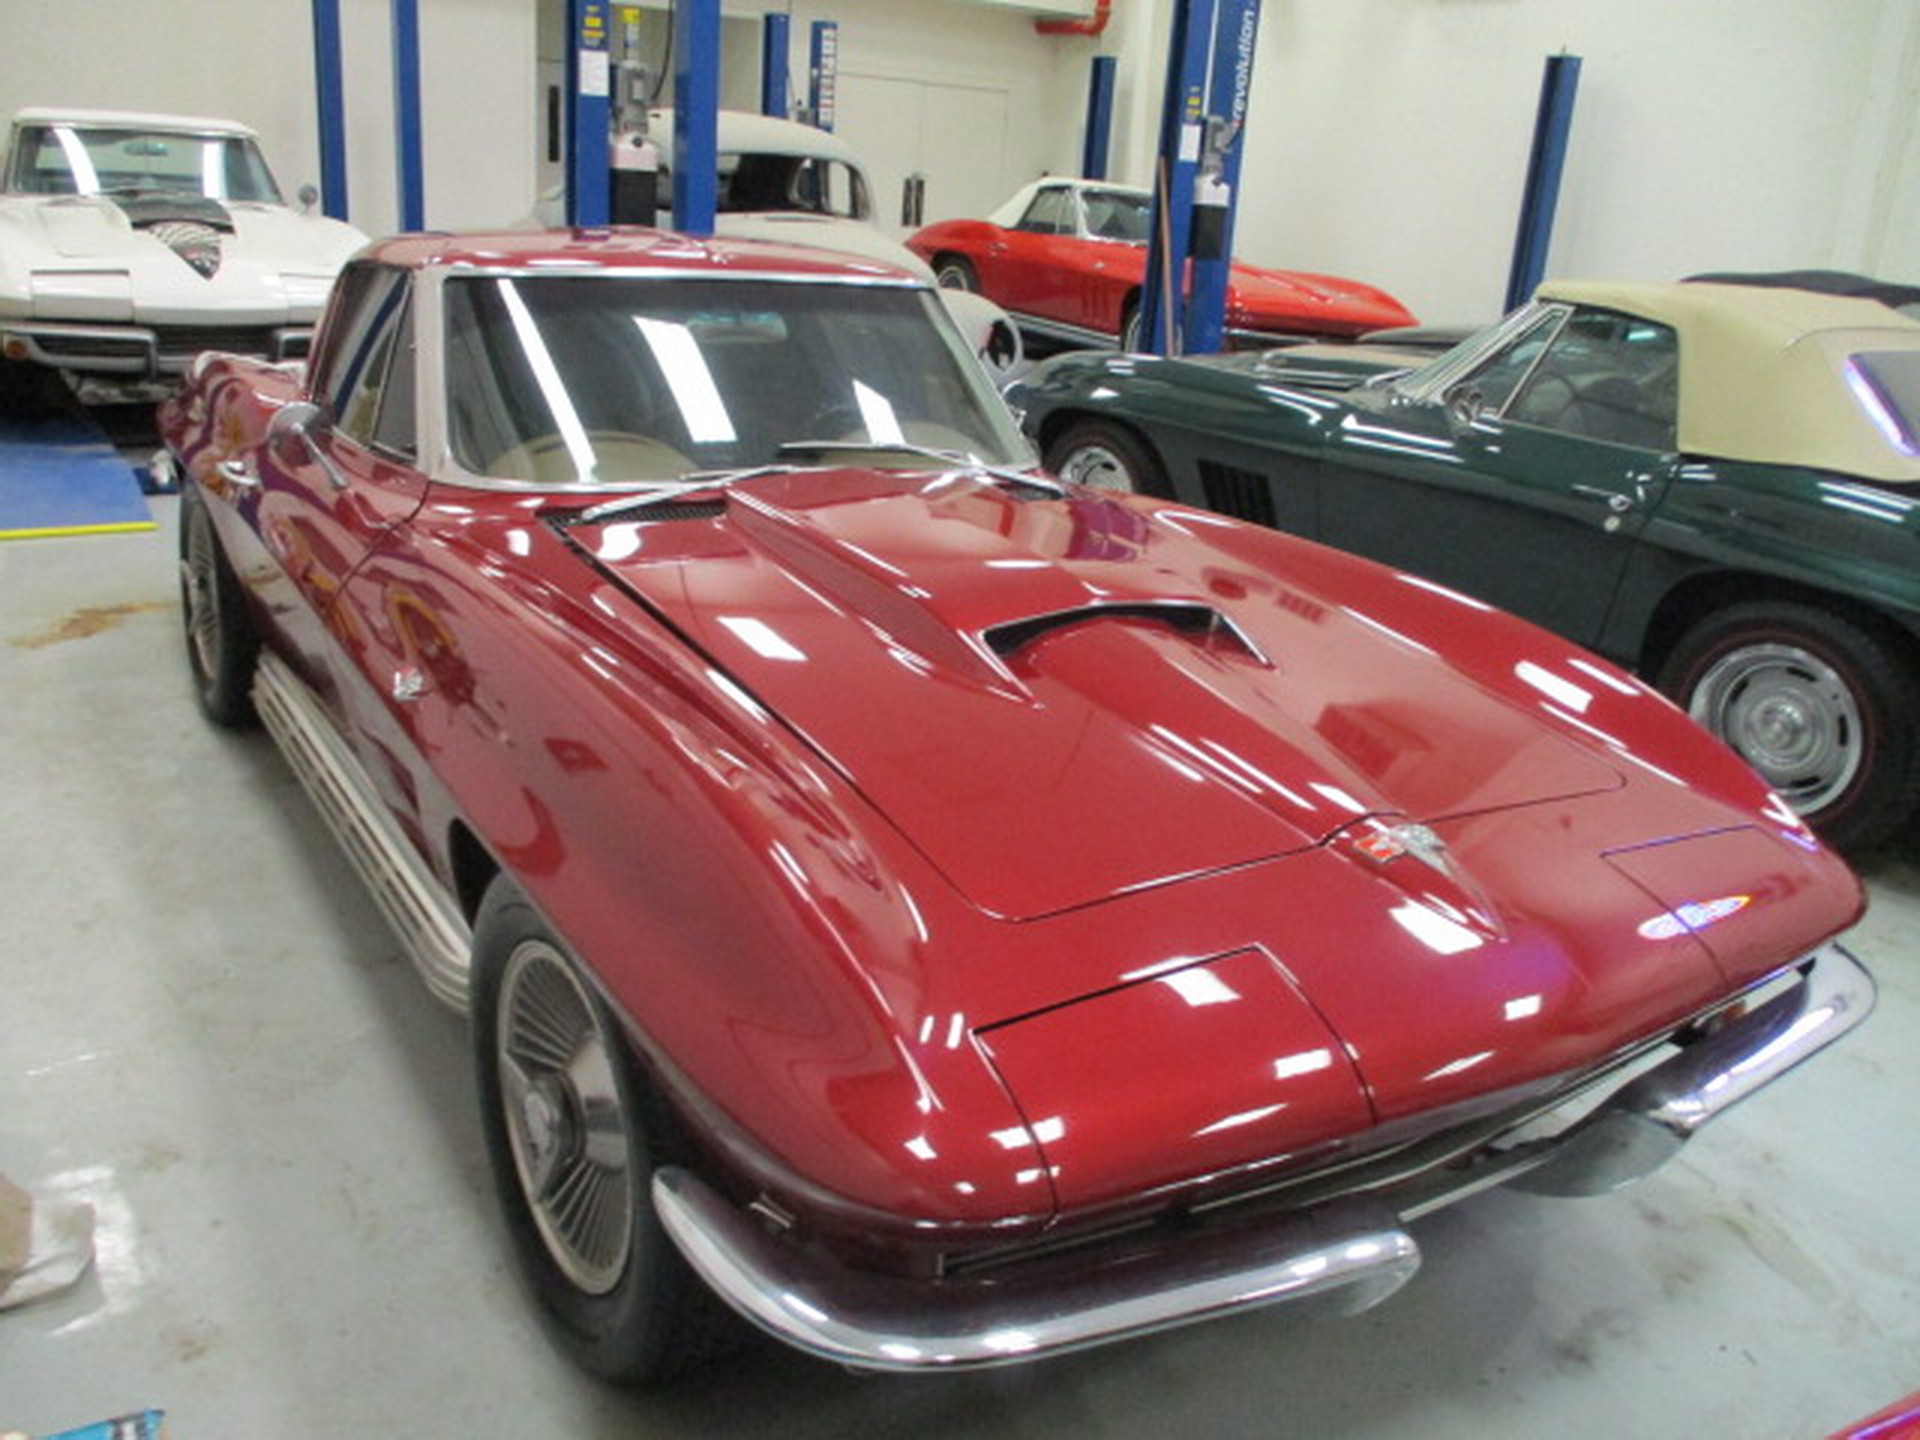 Tampa car collector had dozens of classics. Now they're being auctioned.